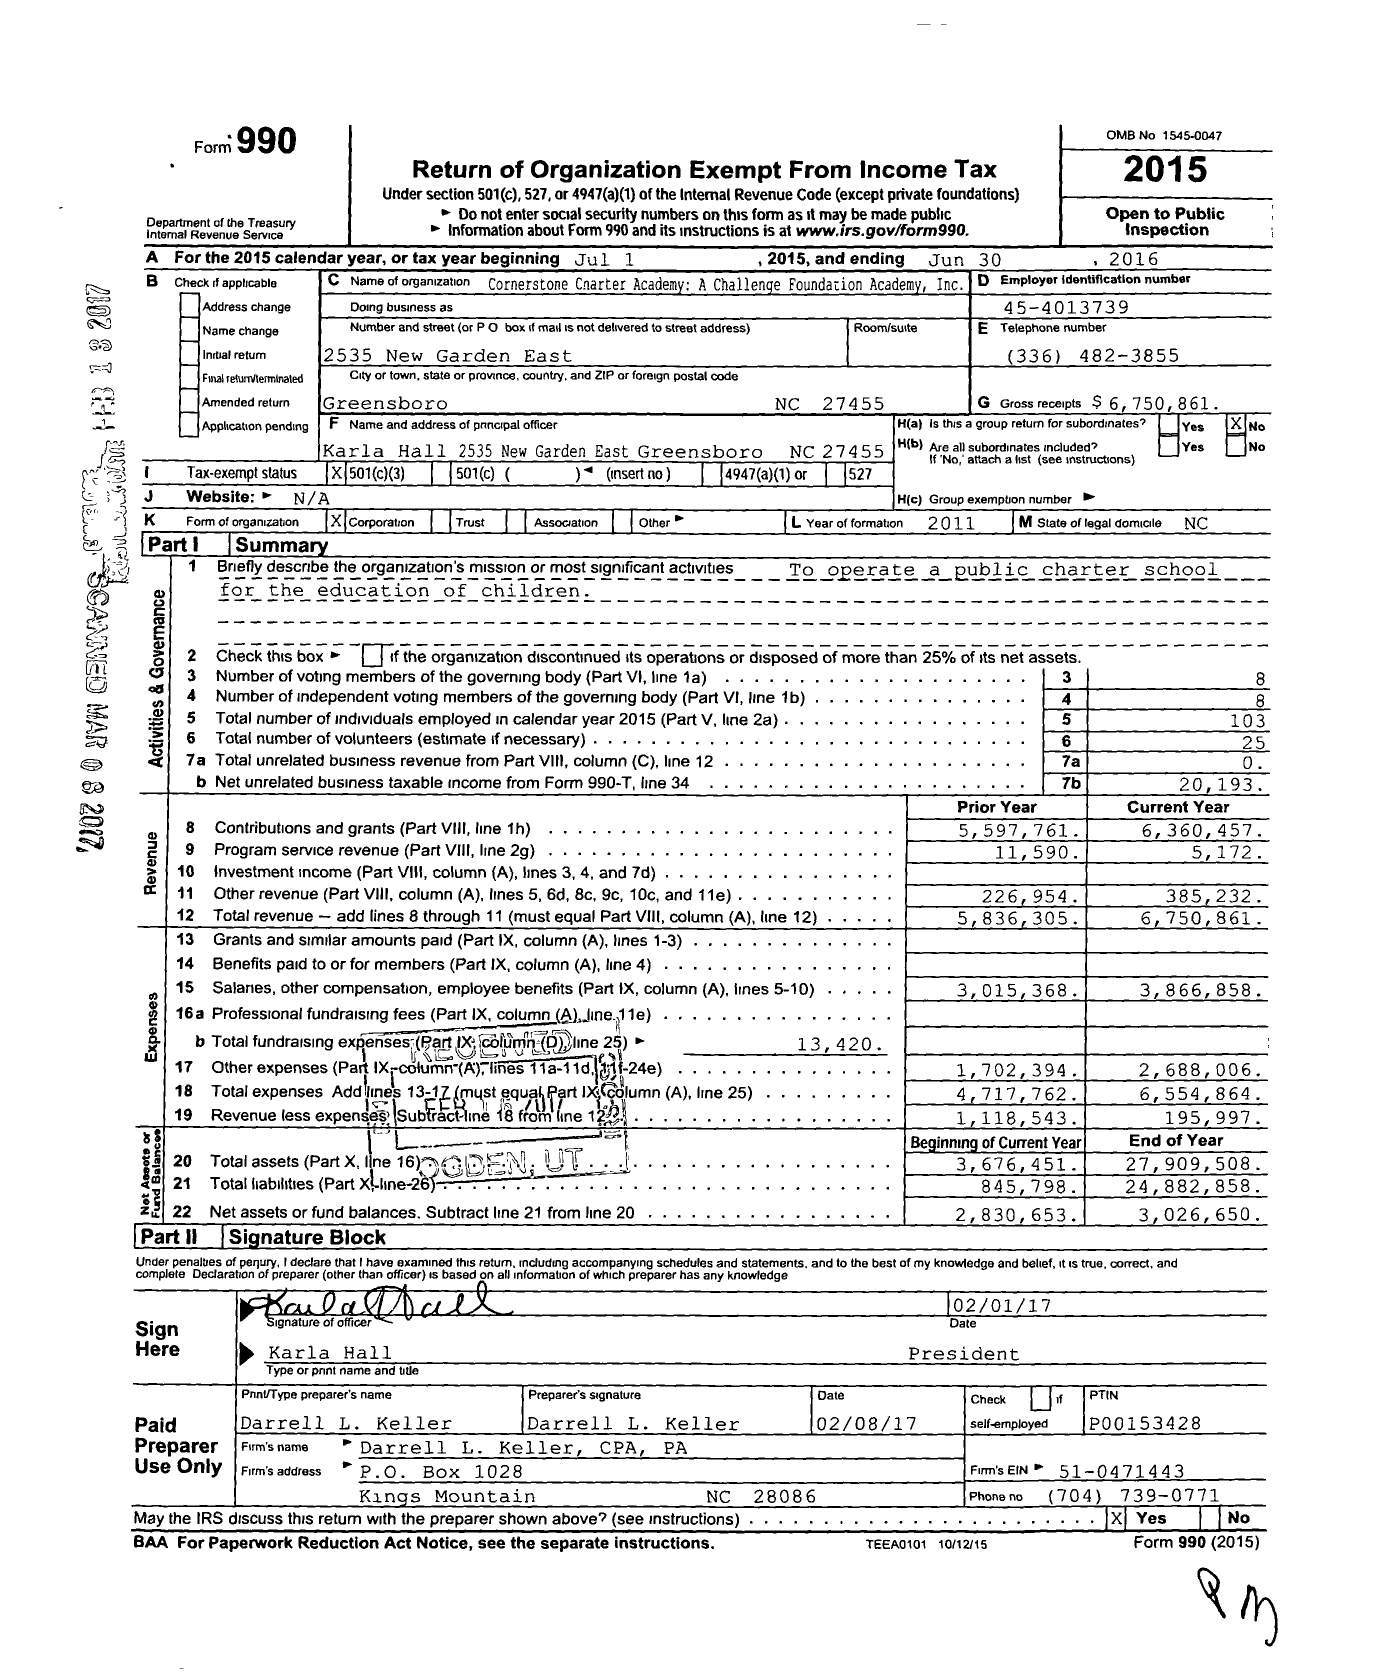 Image of first page of 2015 Form 990 for Cornerstone Charter Academy a Challenge Foundation Academy